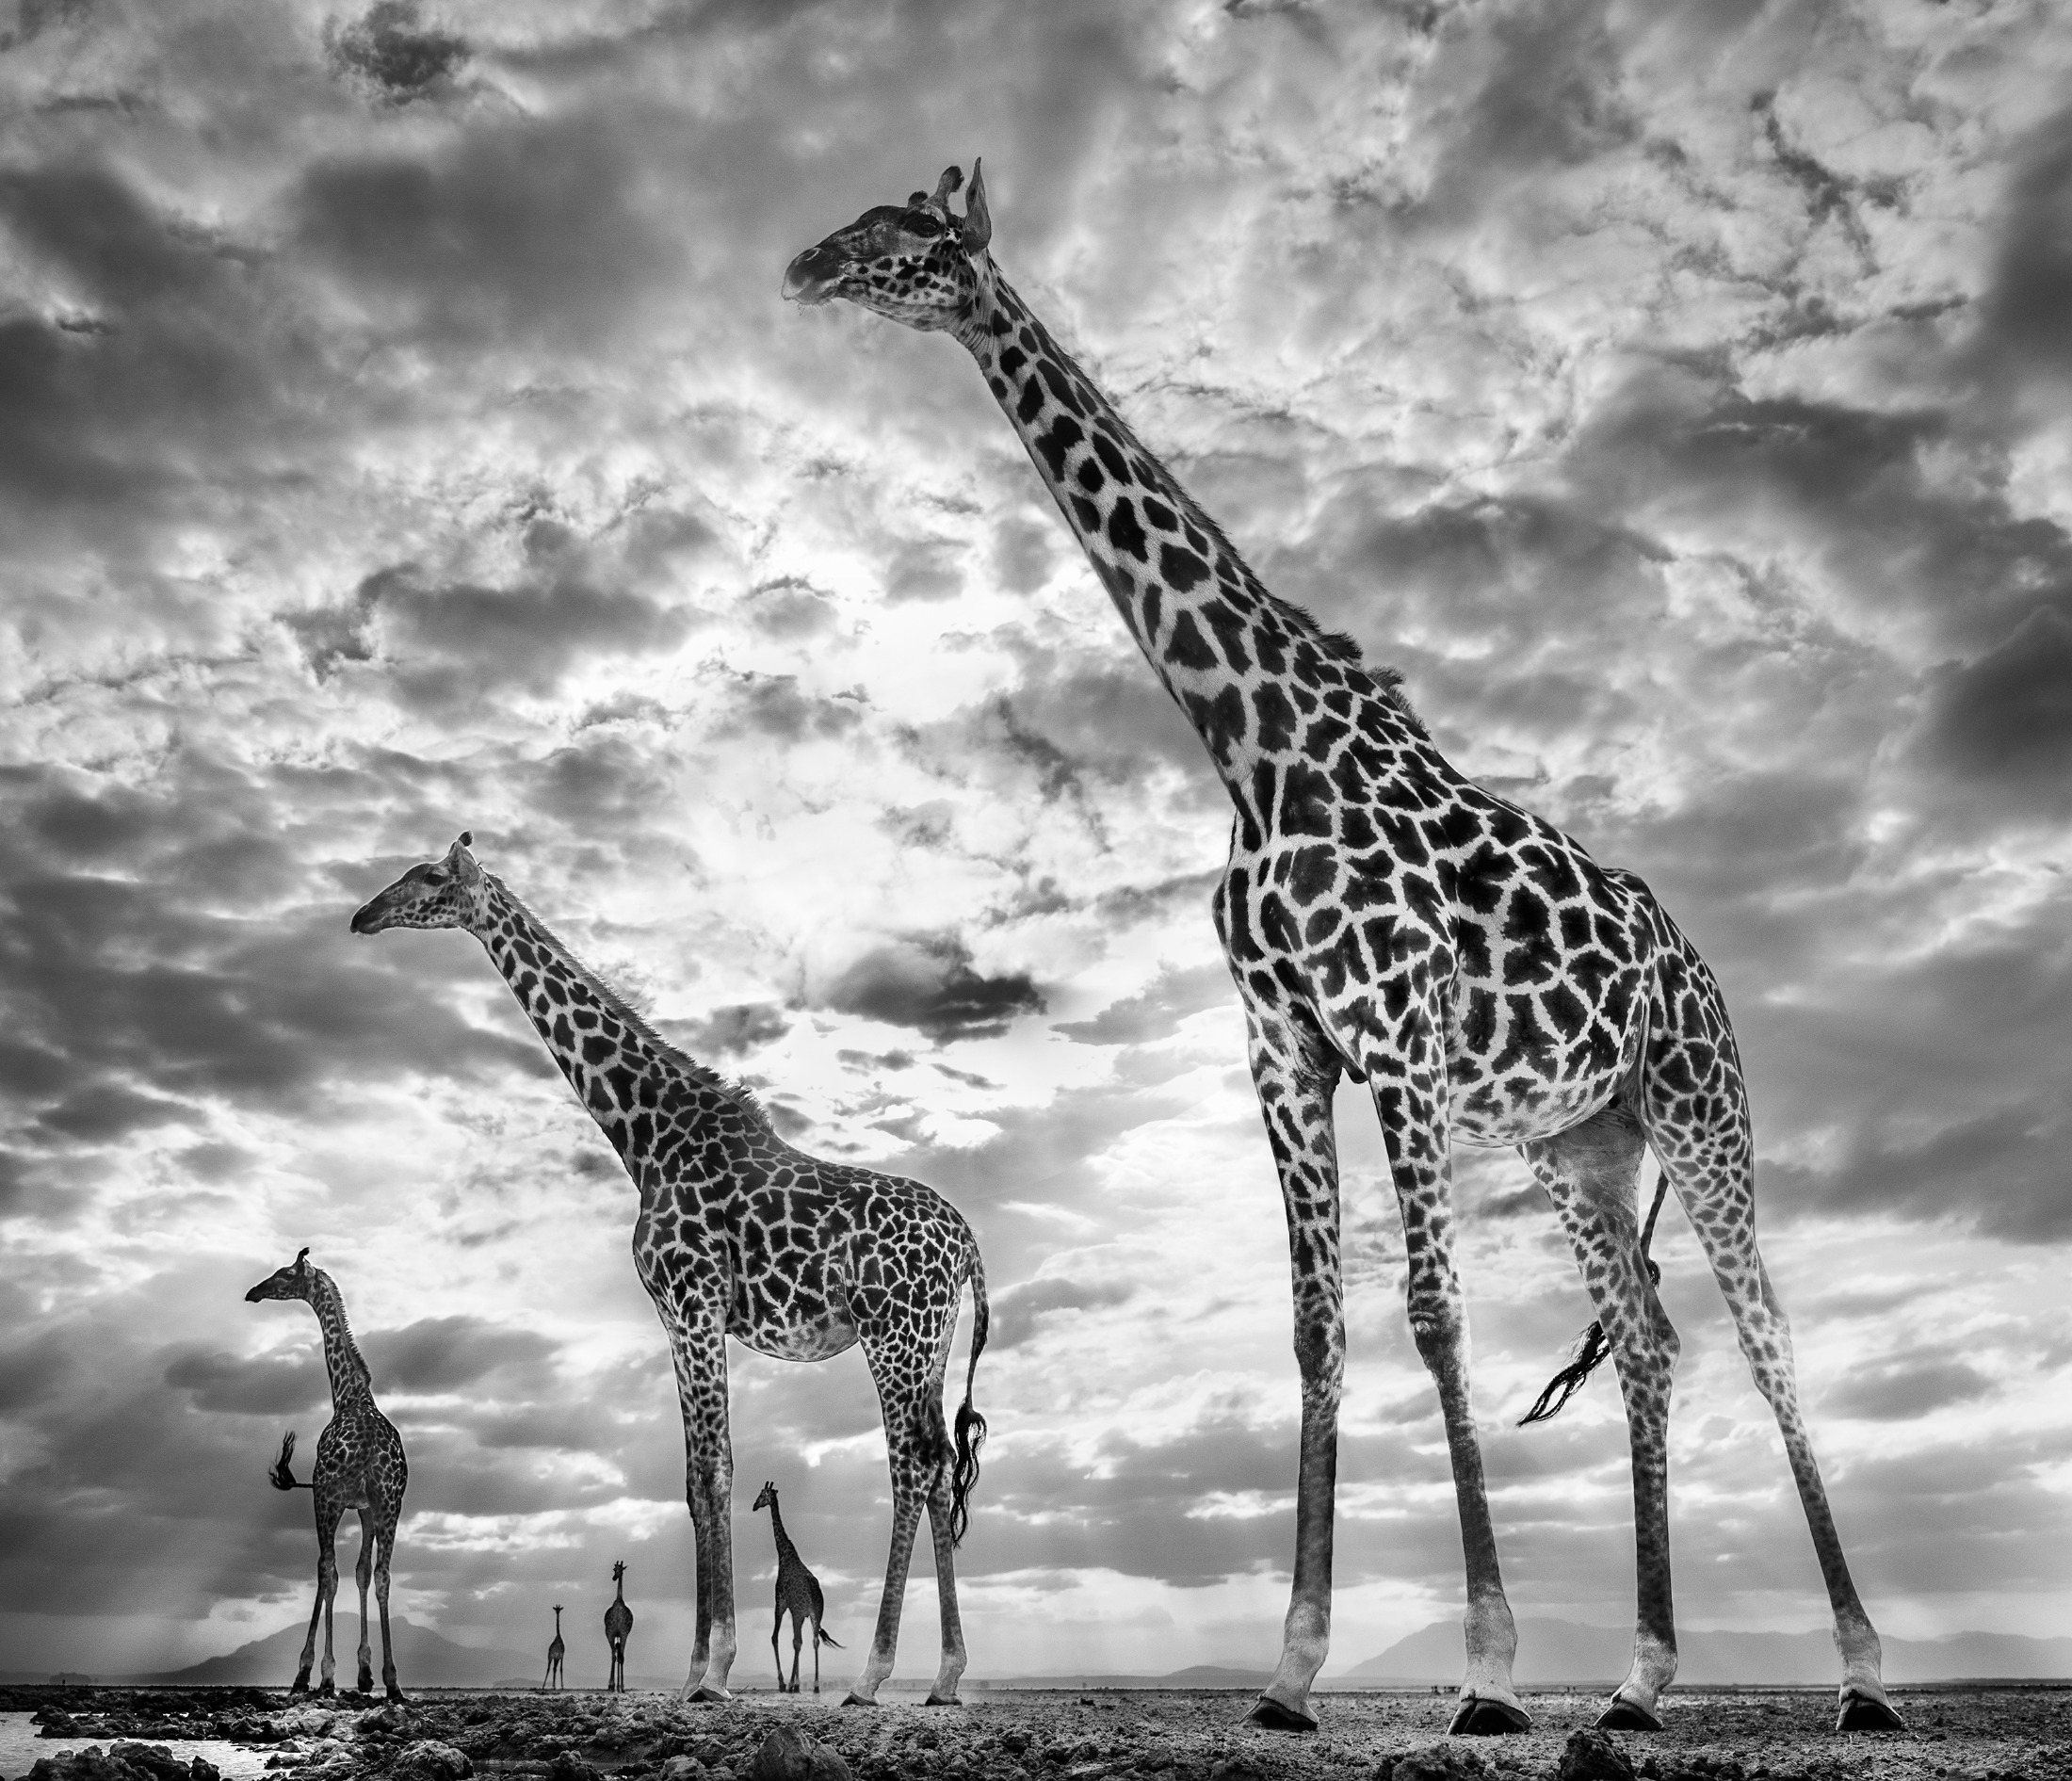 Keeping Up With the Crouches, 2019. Photography by David Yarrow. (Courtesy of Chali-Rosso Art Gallery)